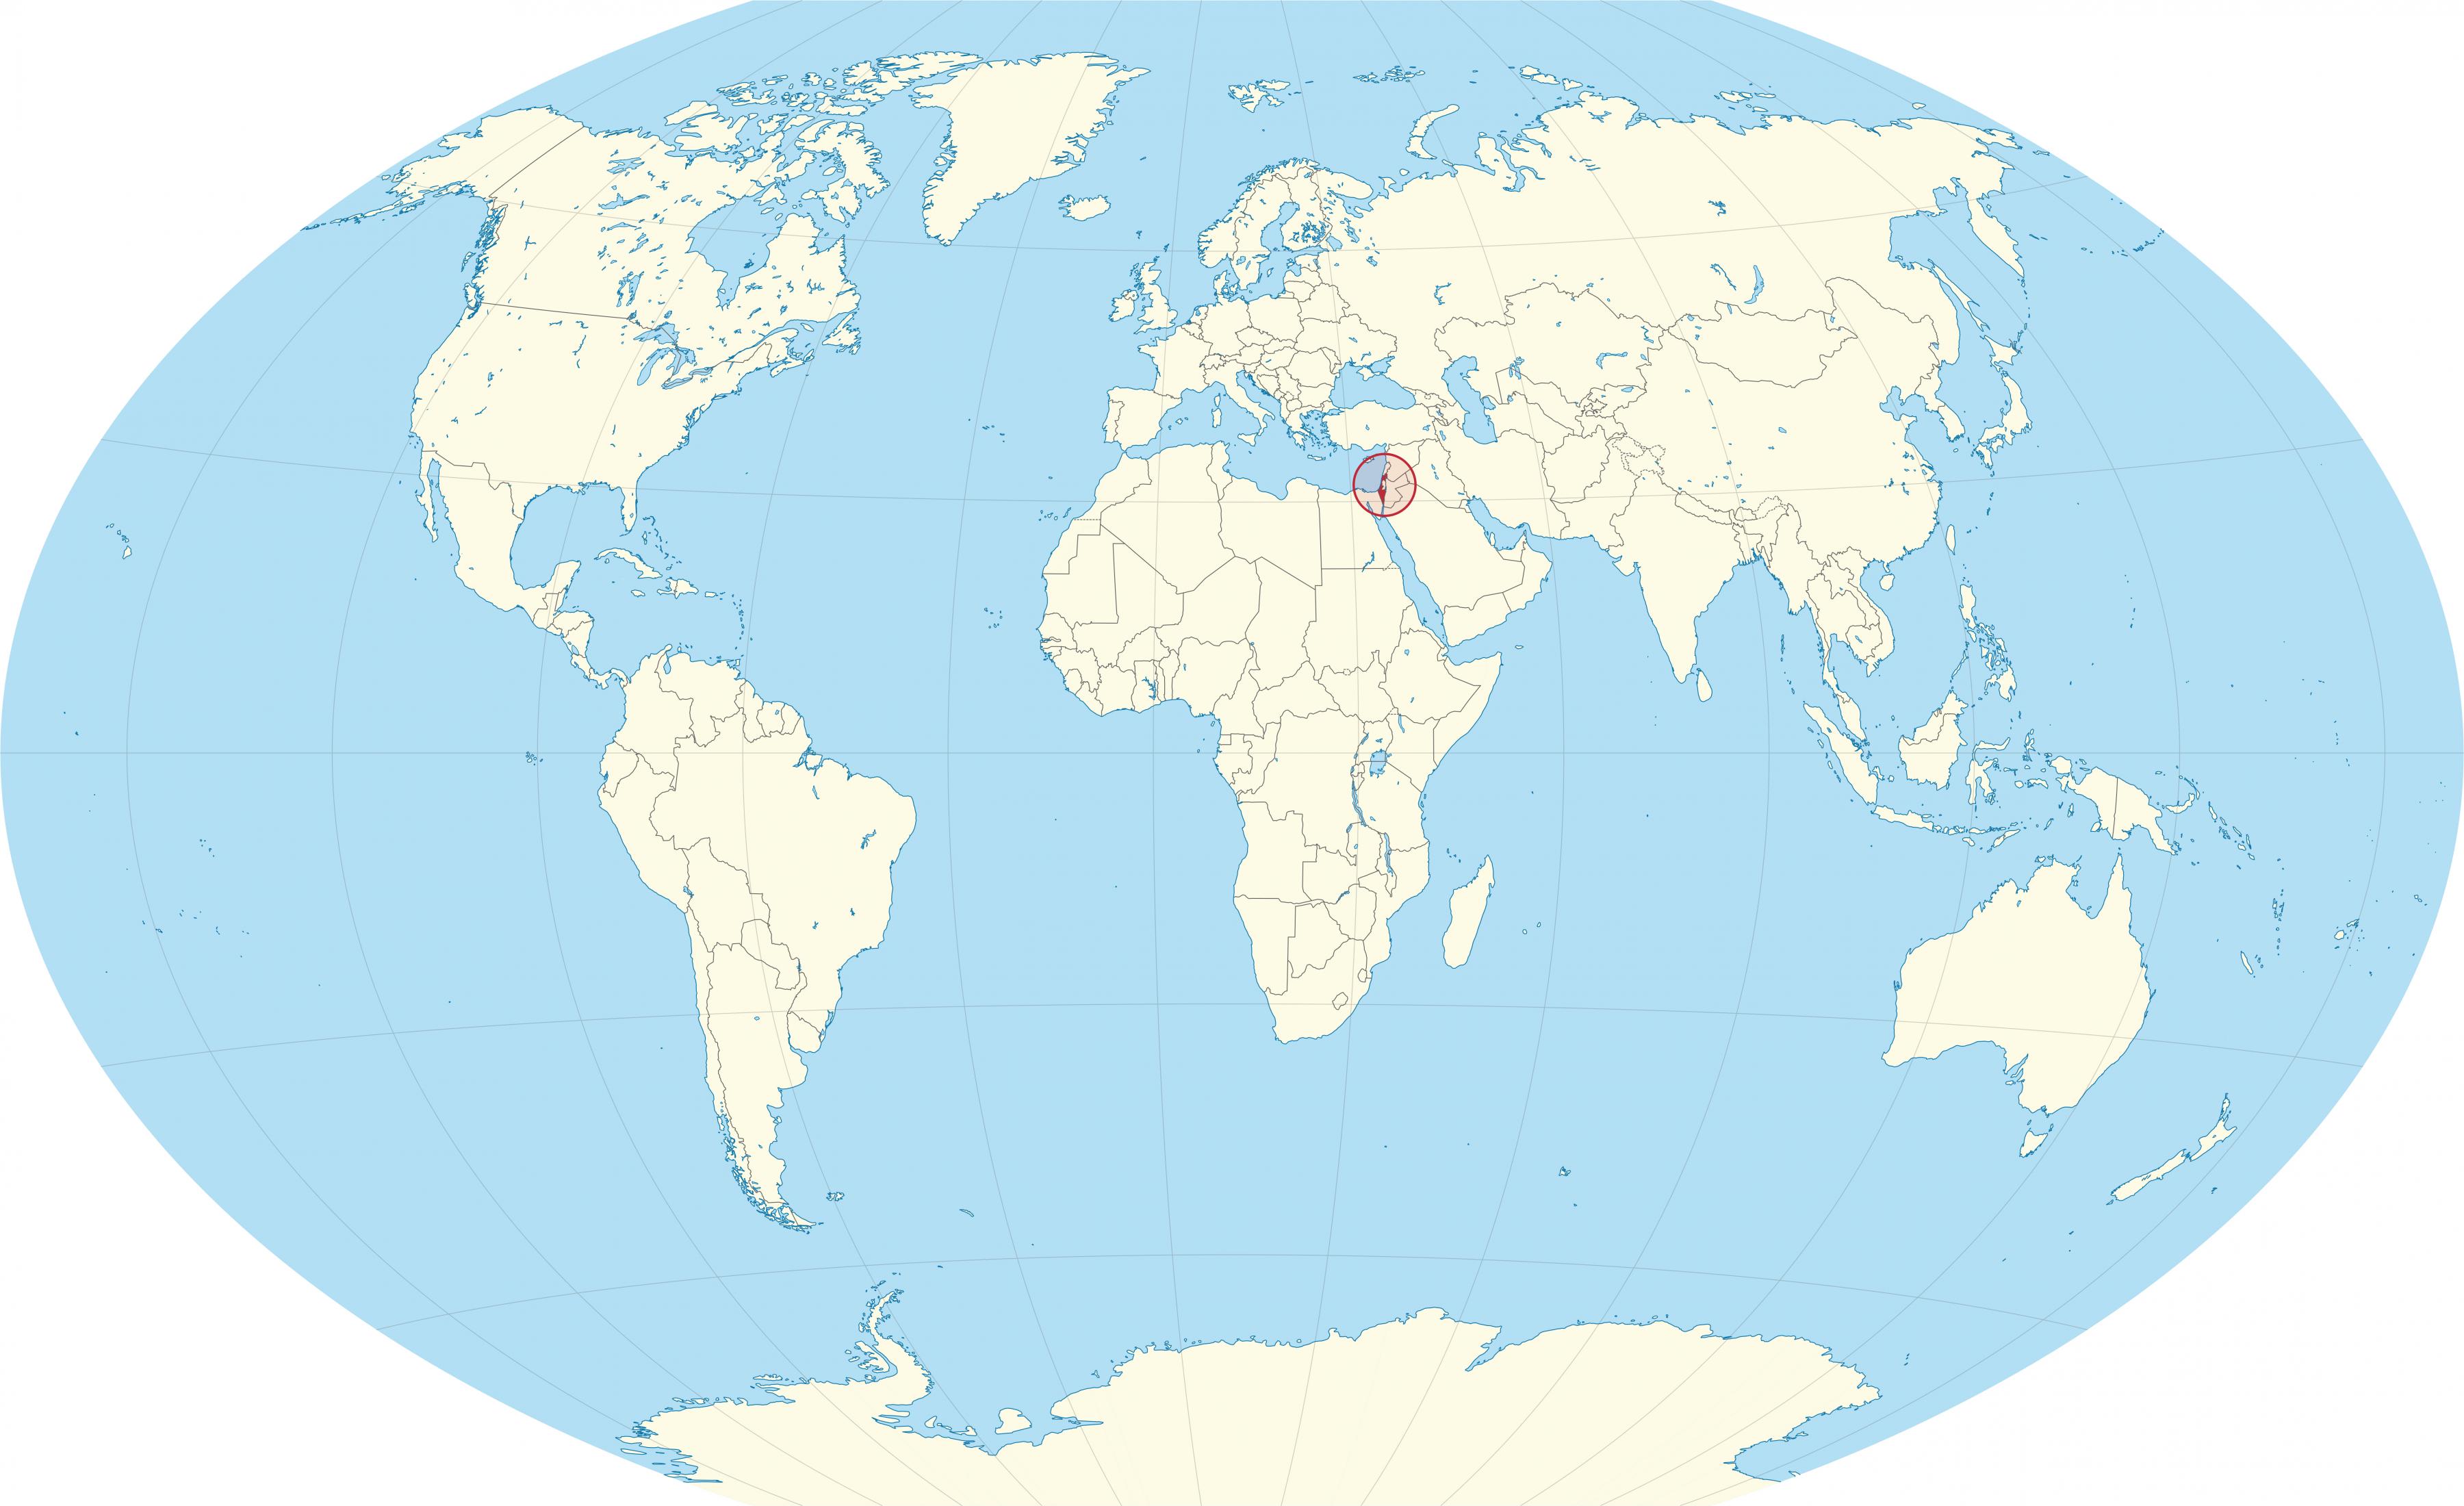 Israel on world map: surrounding countries and location on Asia map